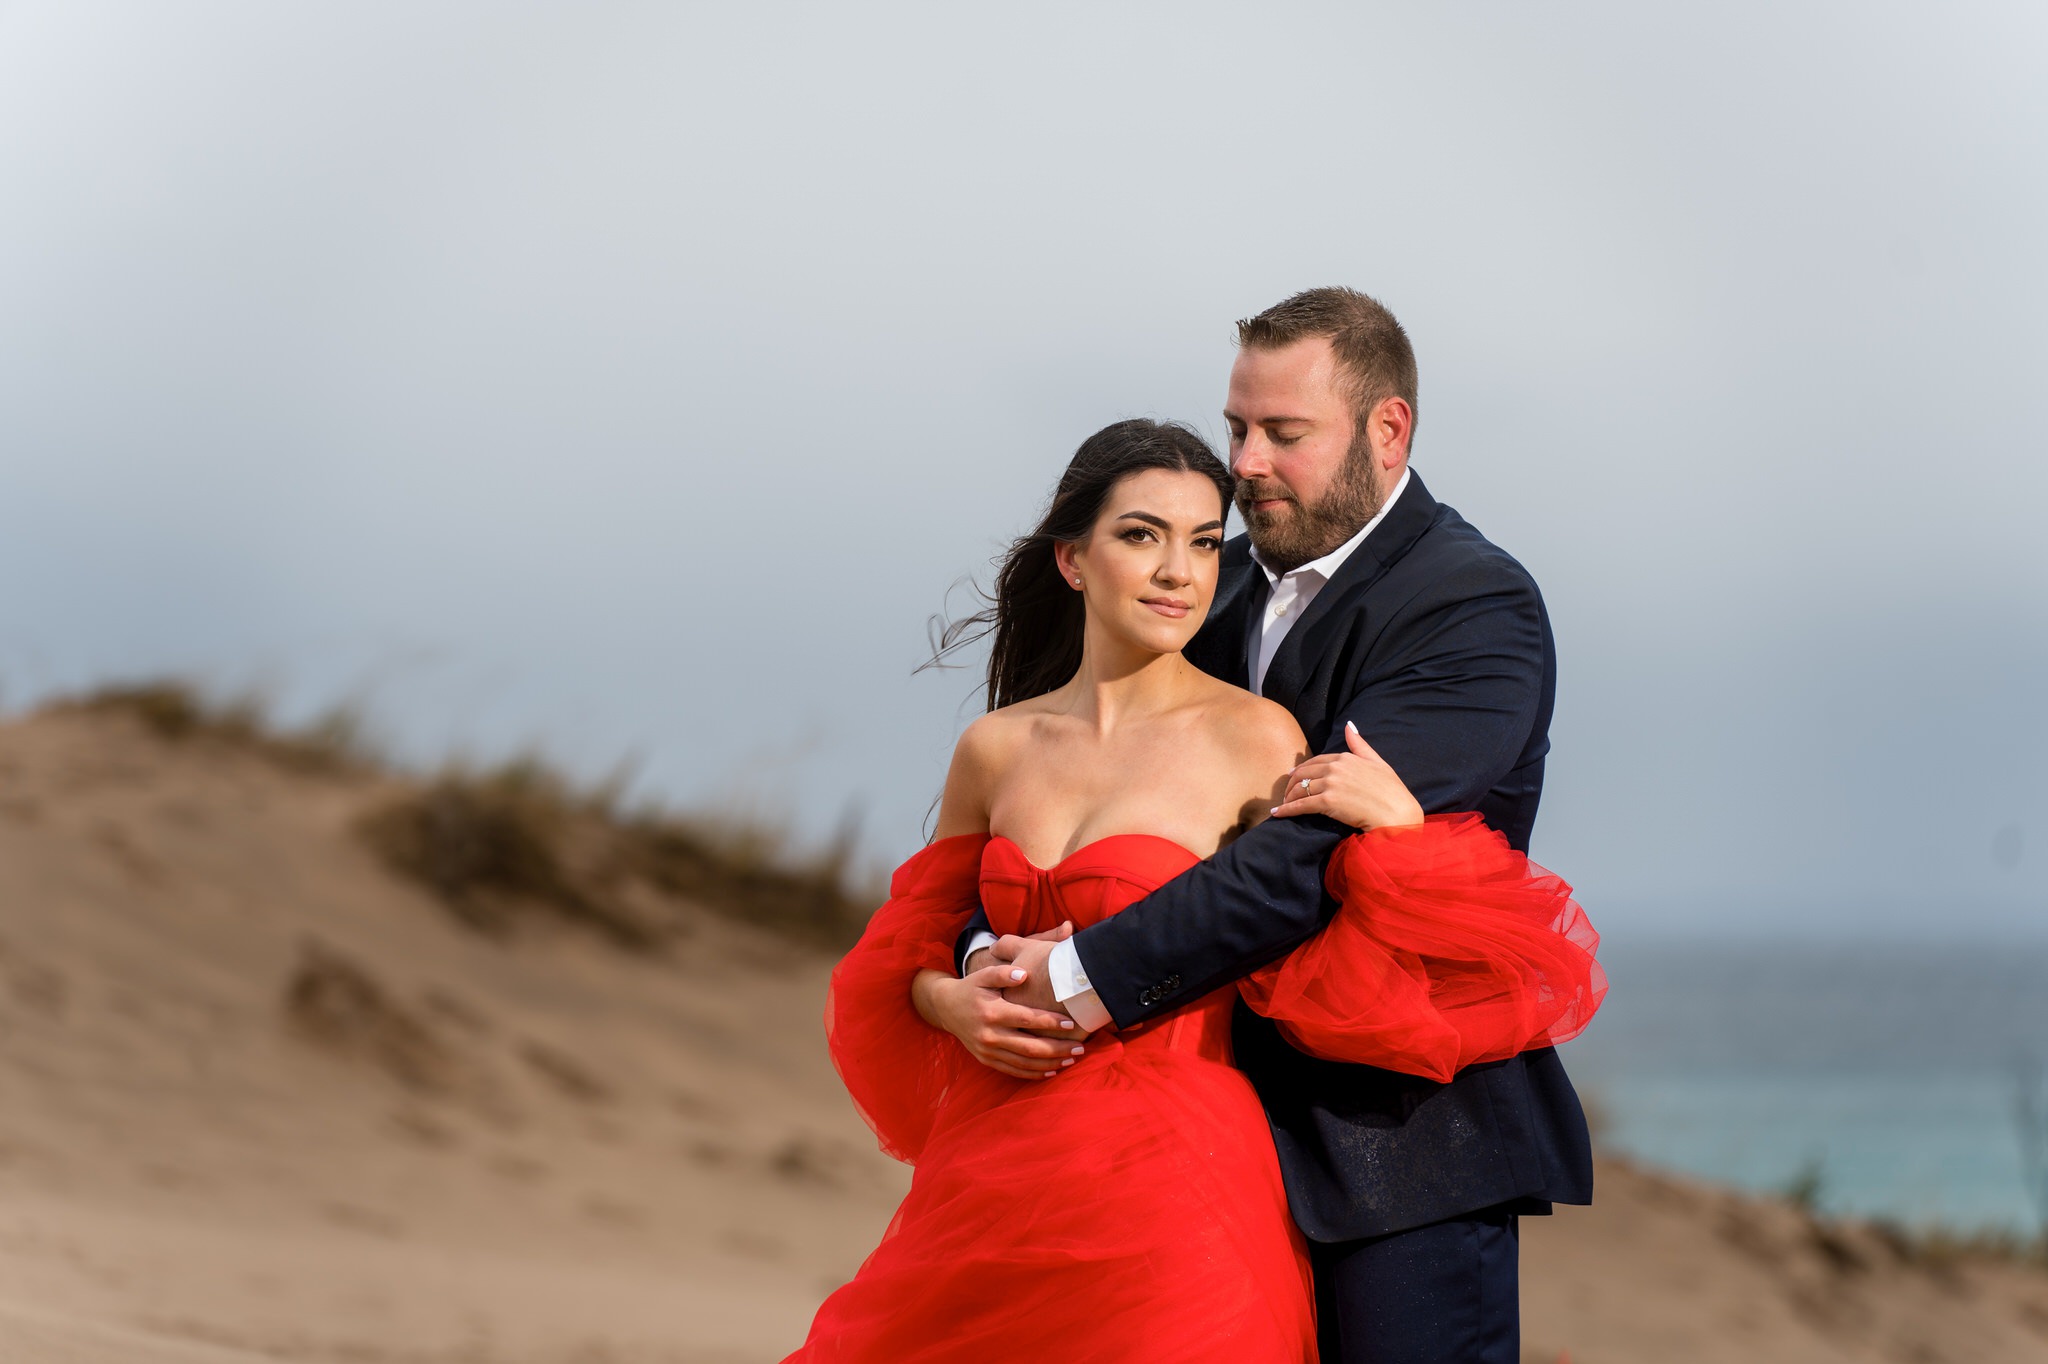 A portrait of a woman wearing a red dress during her Sleeping Bear Dunes engagement shoot.  